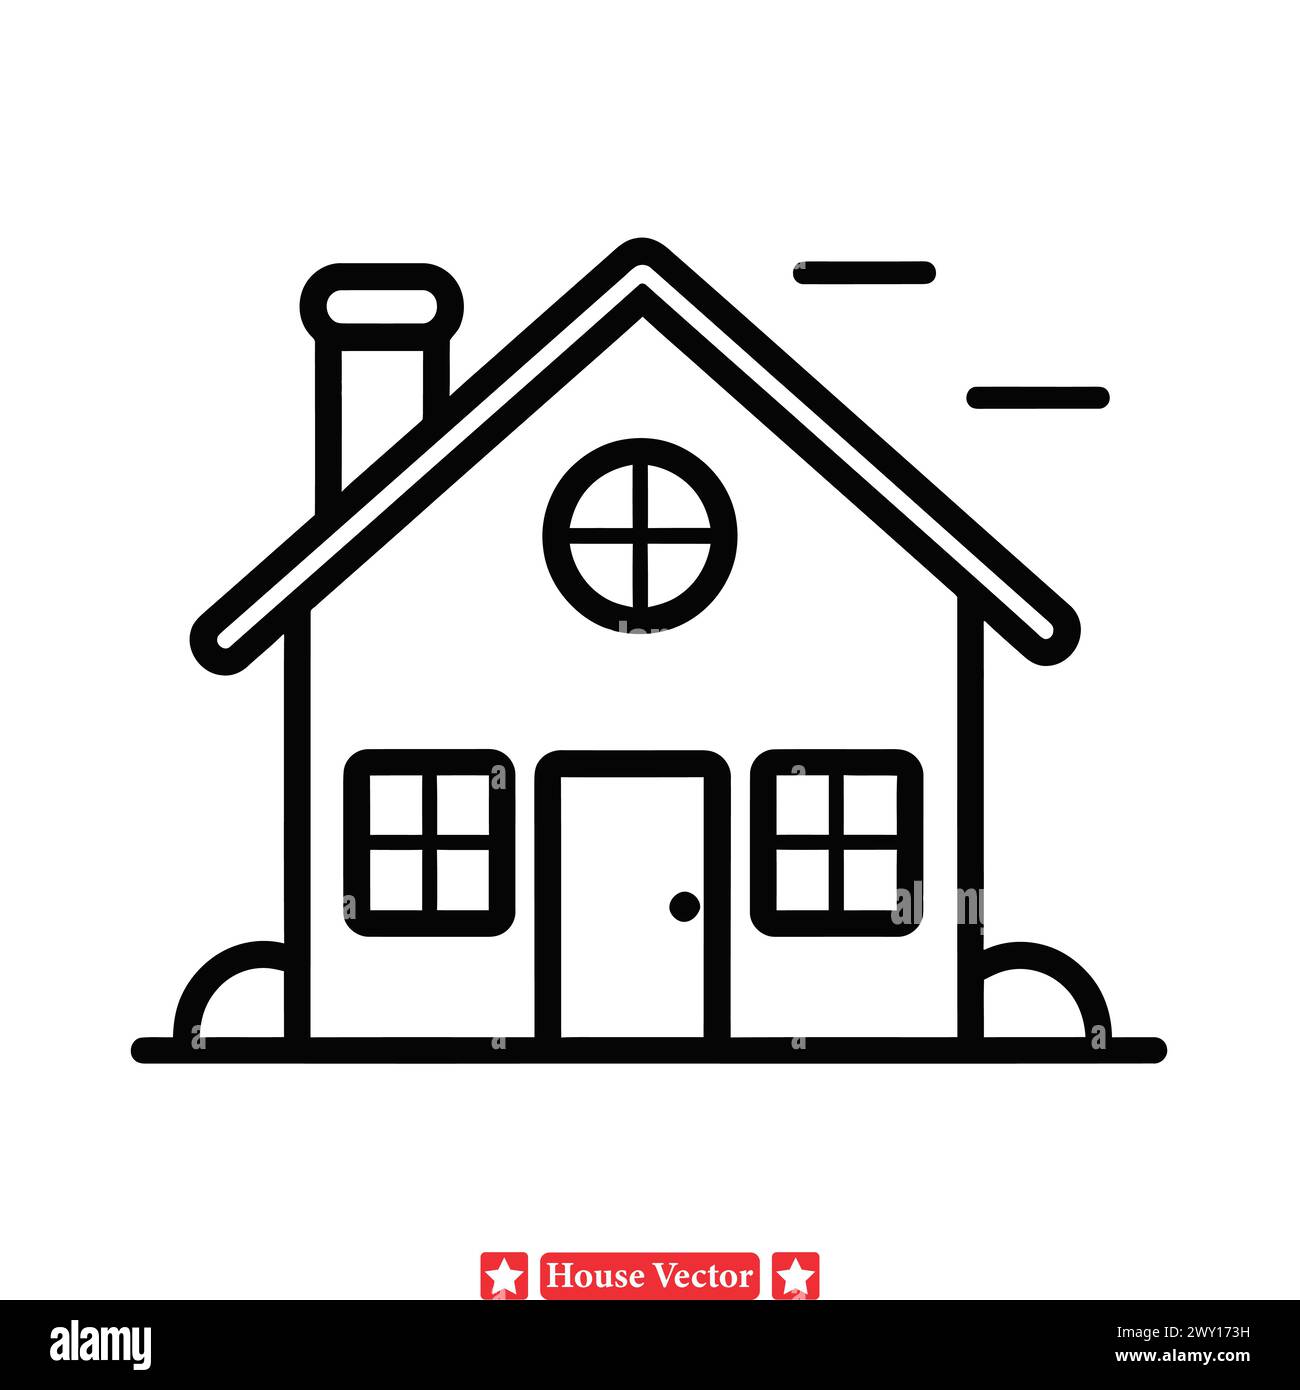 Quaint Neighborhood  Charming House Vector Pack for Wholesome Art Stock Vector